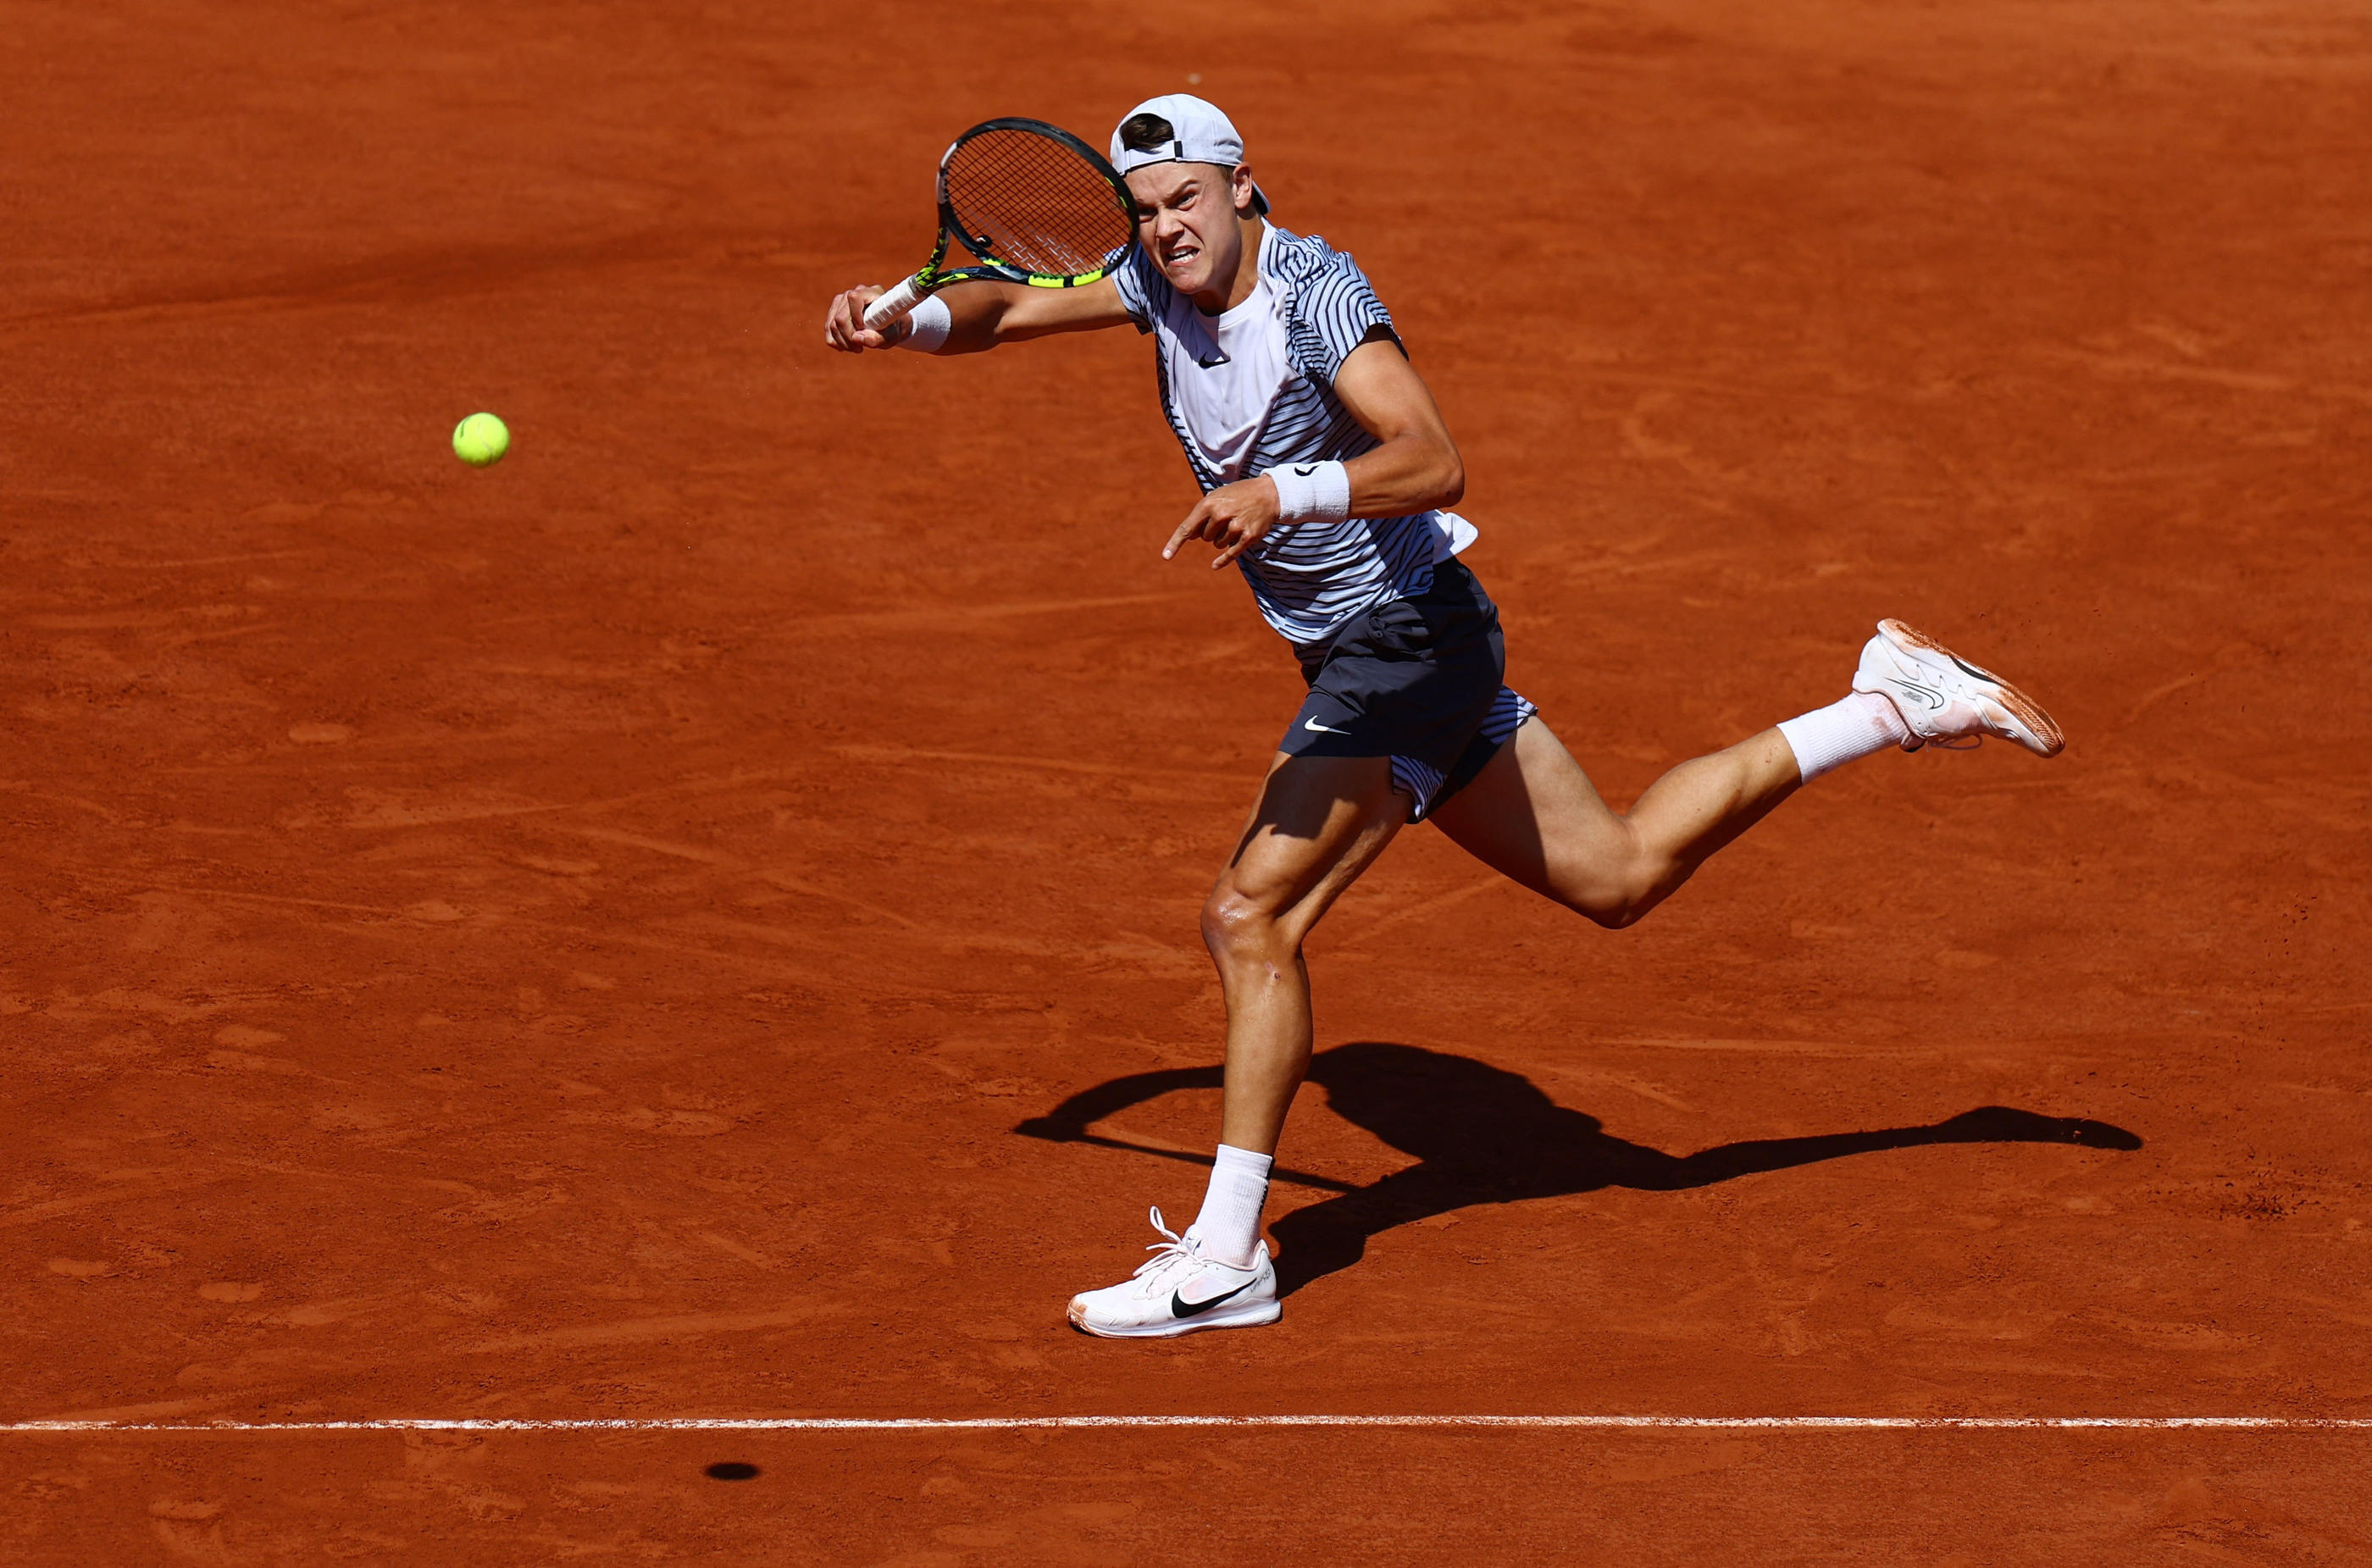 Tennis - French Open - Roland Garros, Paris, France - June 5, 2023 Denmark's Holger Rune in action during his fourth round match against Argentina's Francisco Cerundolo REUTERS/Lisi Niesner